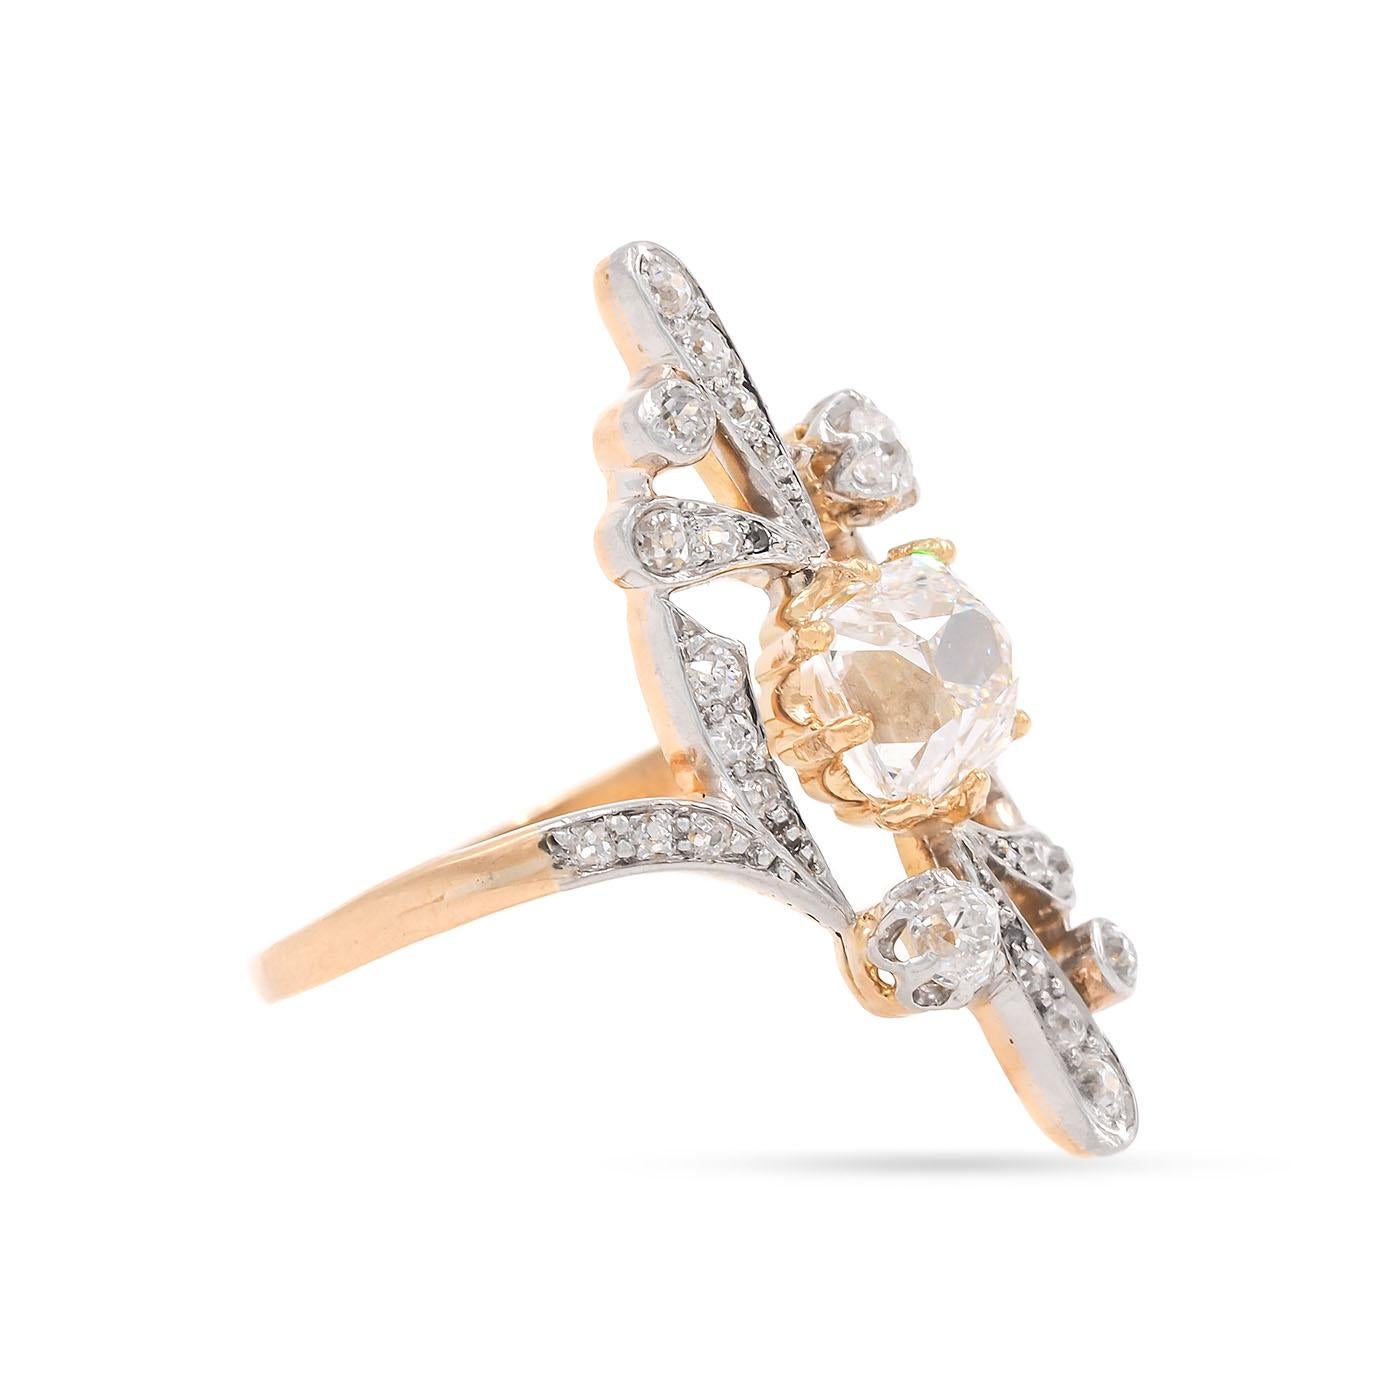 A Unique Antique Art Nouveau era 2.00 Carat Old Mine Cut ('Peruzzi') Diamond Engagement Ring composed of platinum & 18k yellow gold. GIA certified center stone, graded G color & VS1 clarity. With an additional 30 diamonds in the ornate setting with